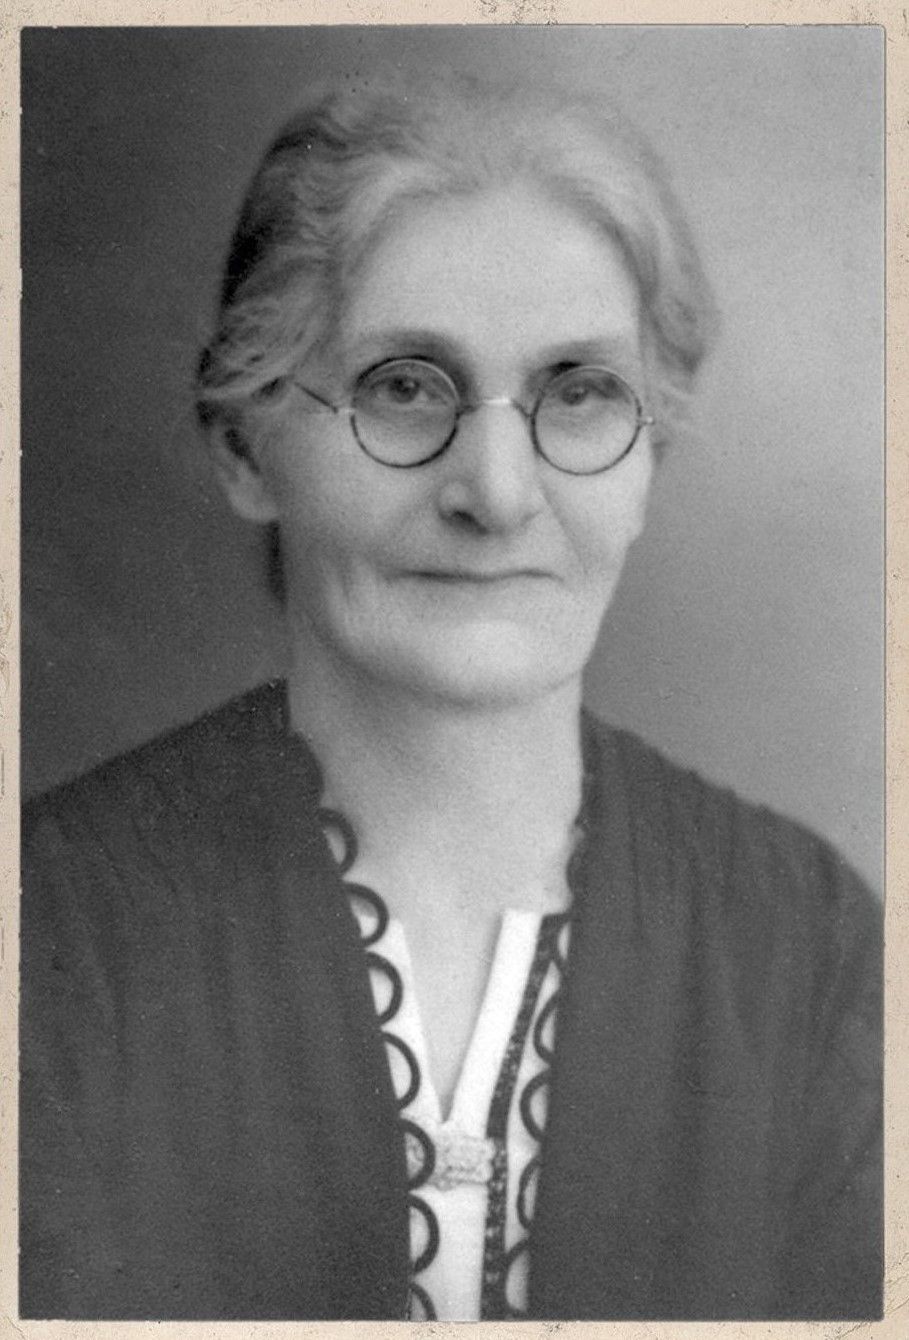 Black and white portrait photo of a women with grey hair and spectacles